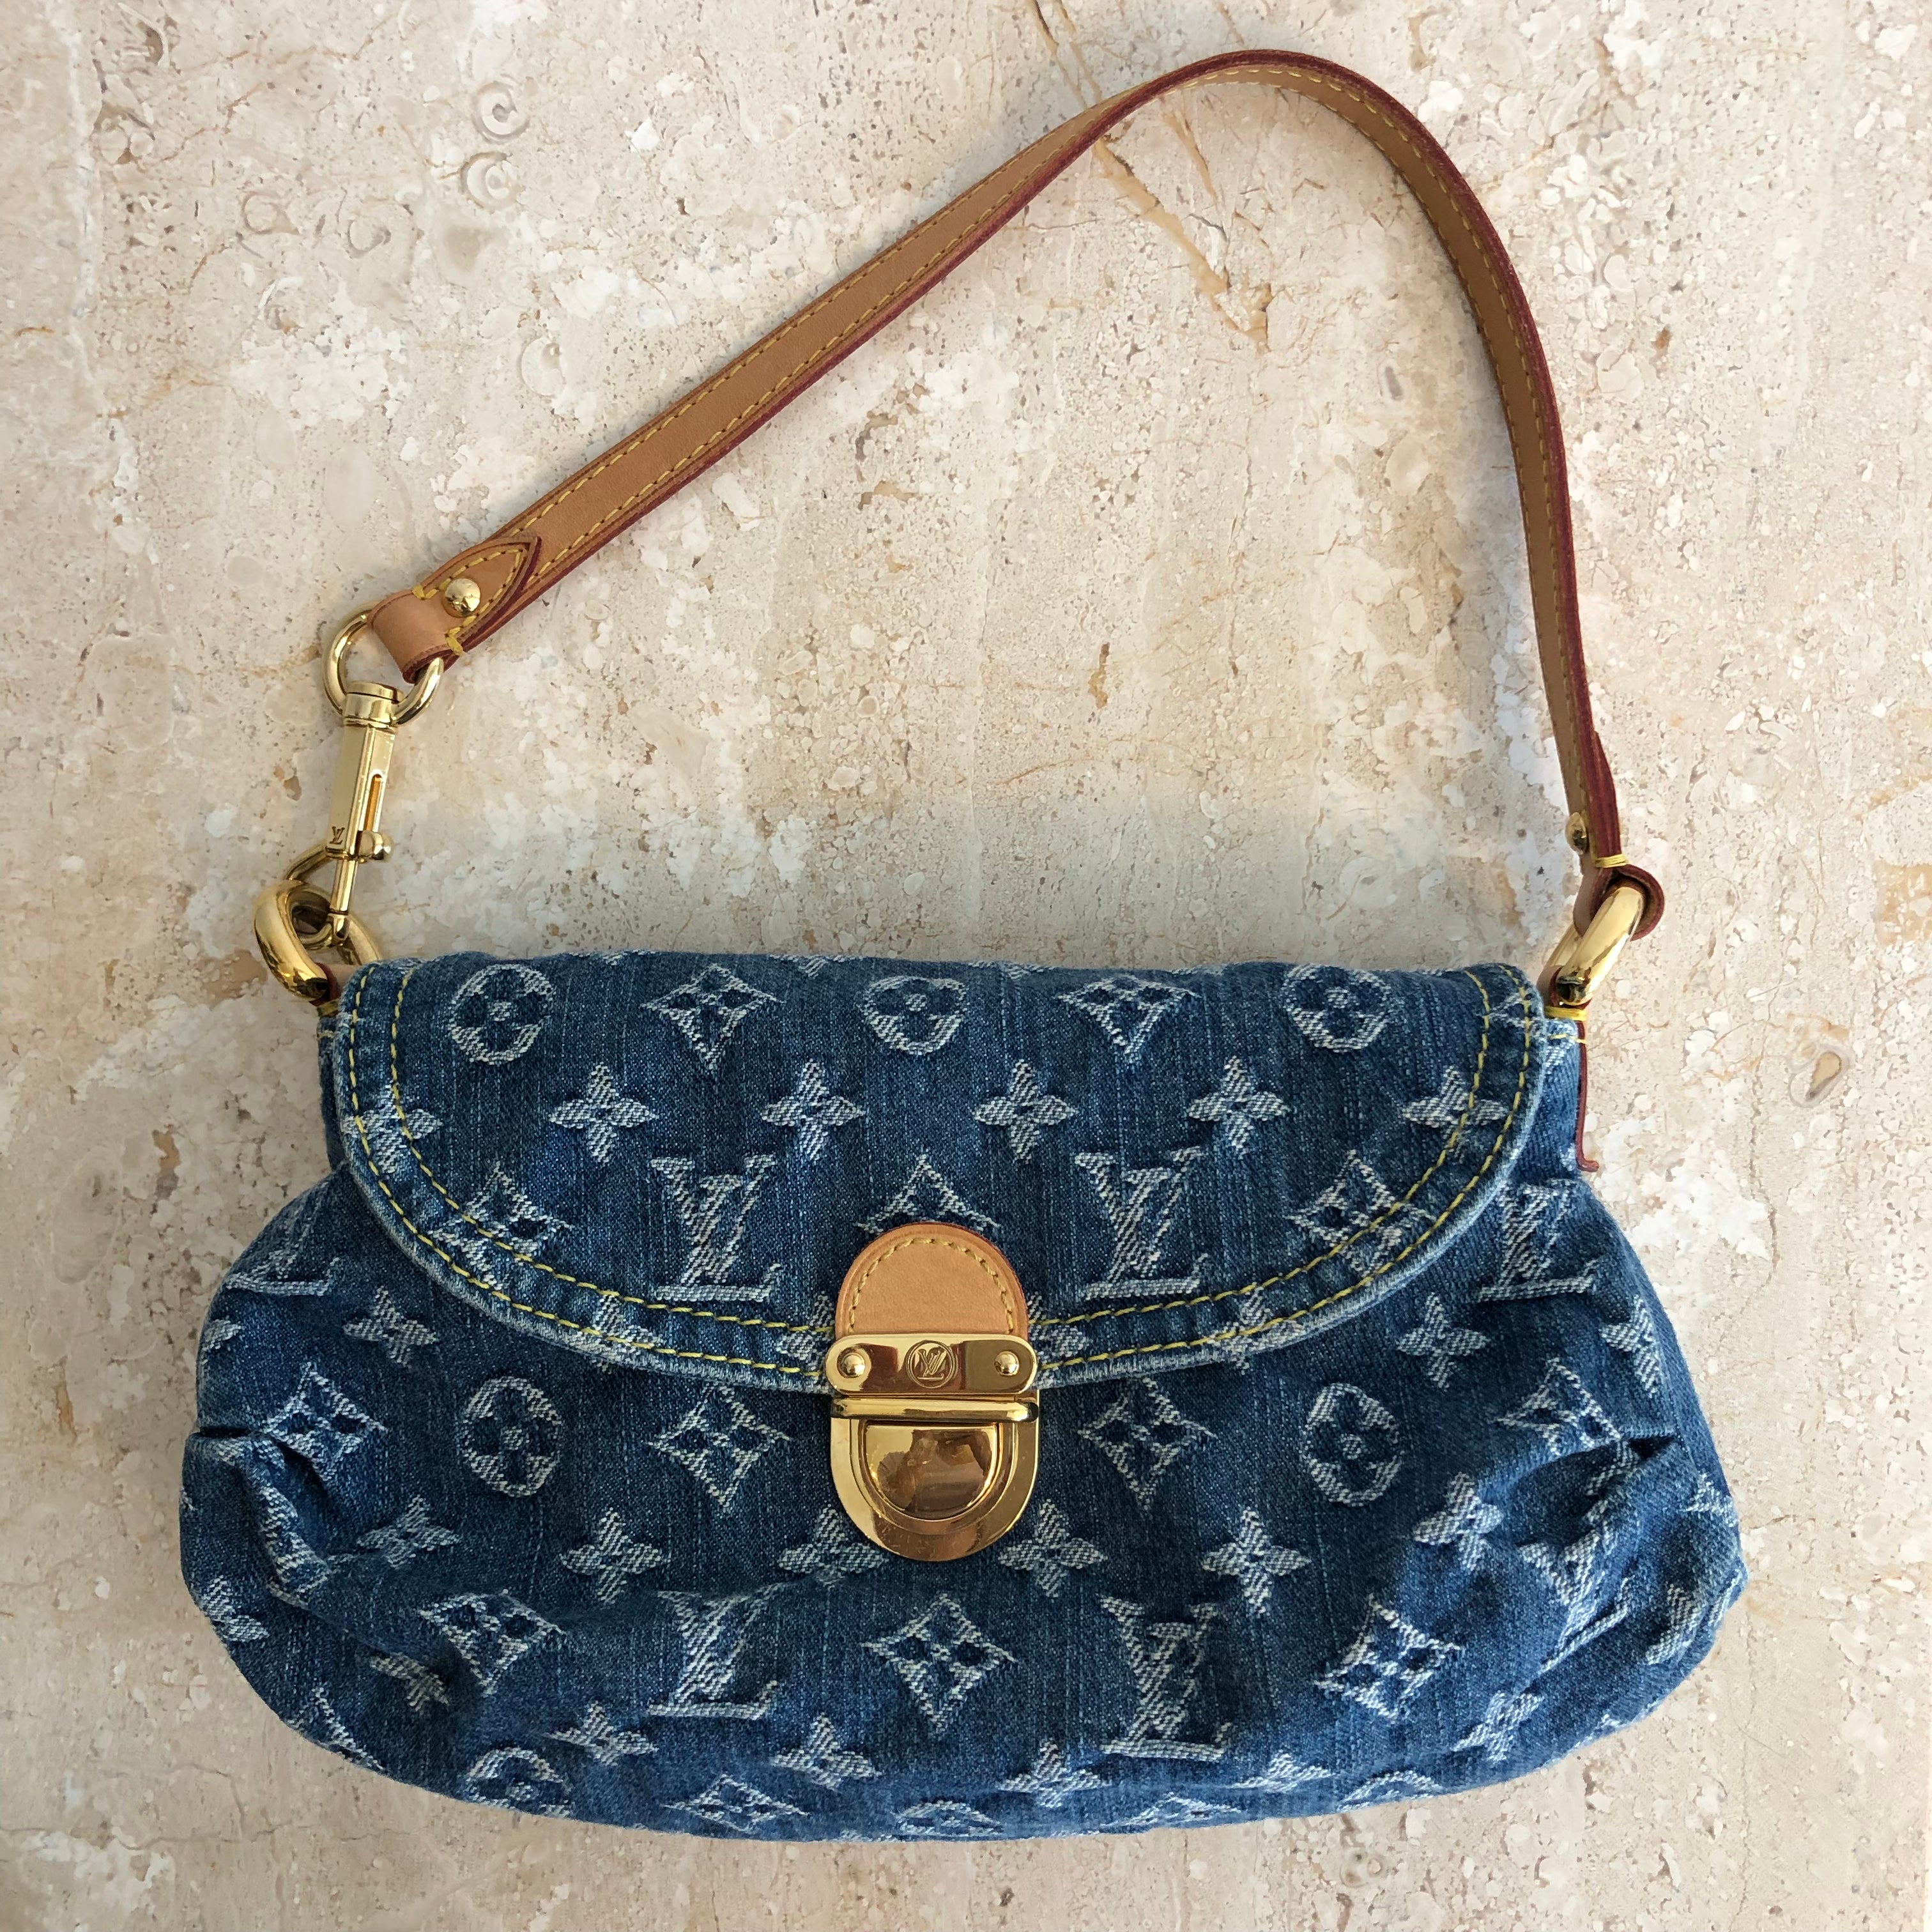 Will the Louis Vuitton store verify authenticity  Quora